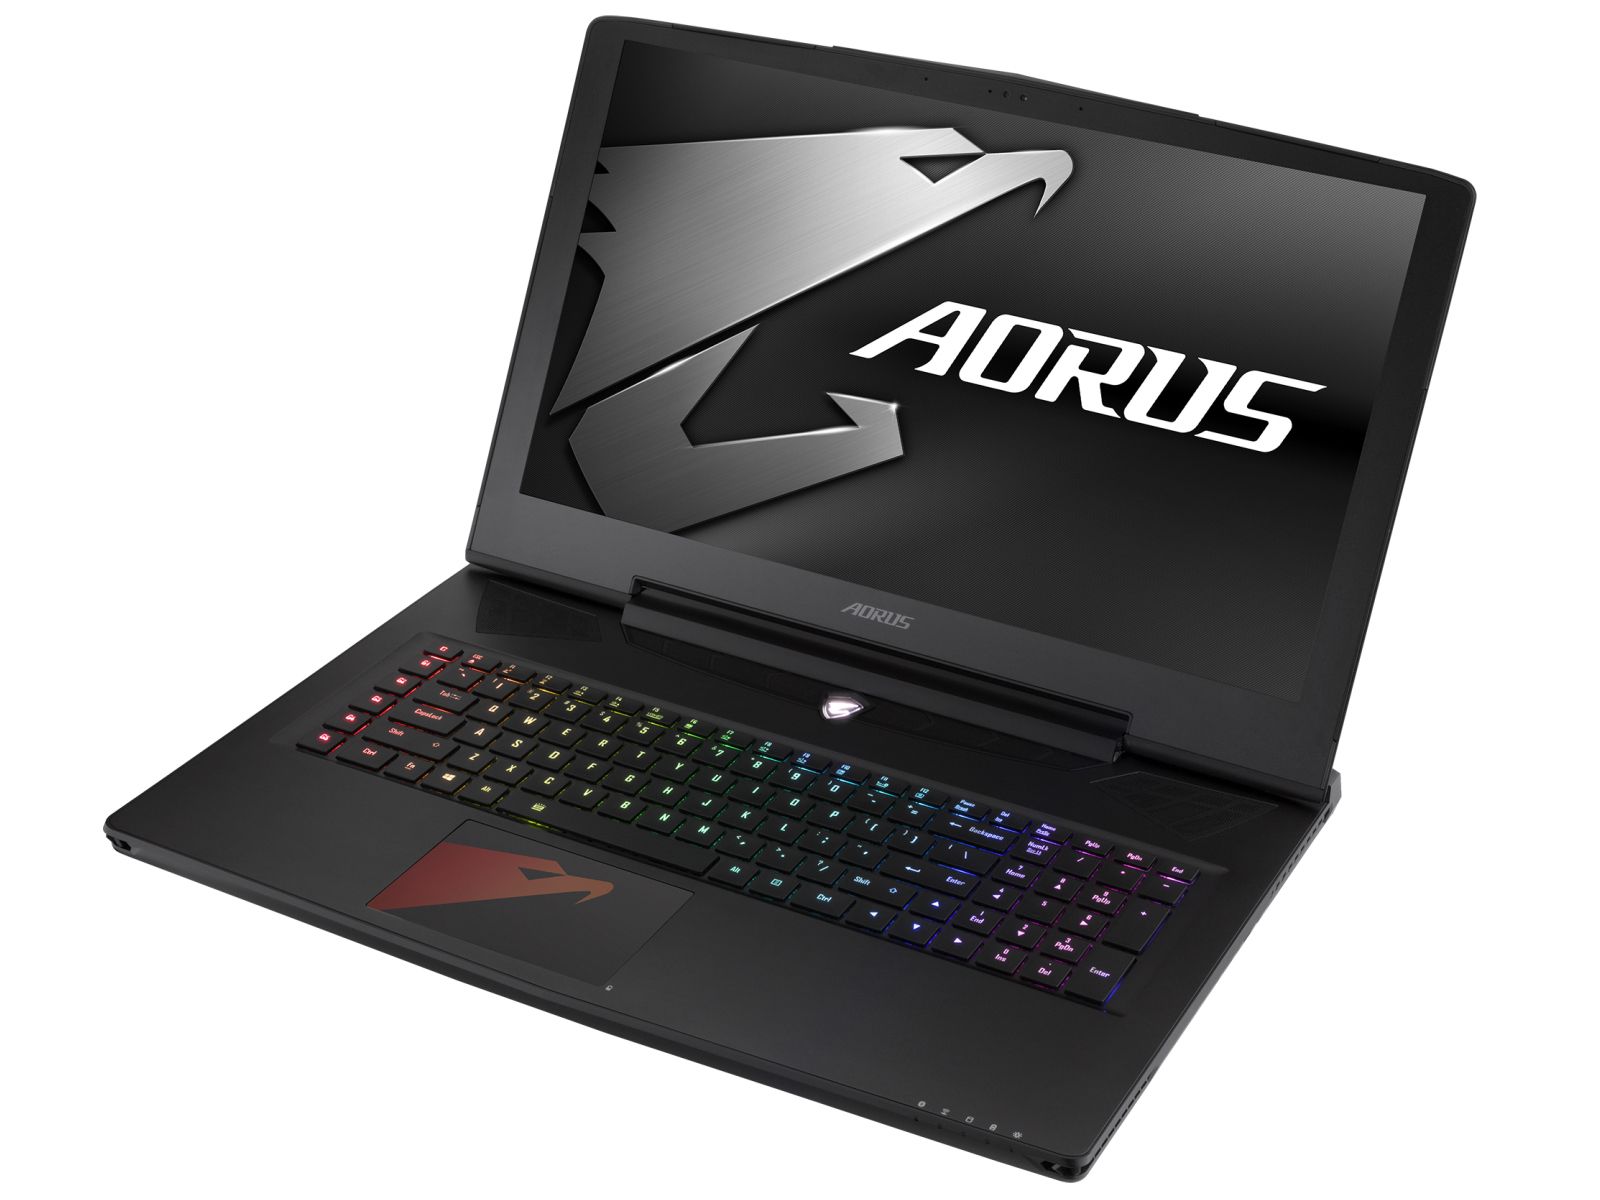 Aorus X7 DT and X5 Gigabyte notebooks with Intel Core i7-8850H